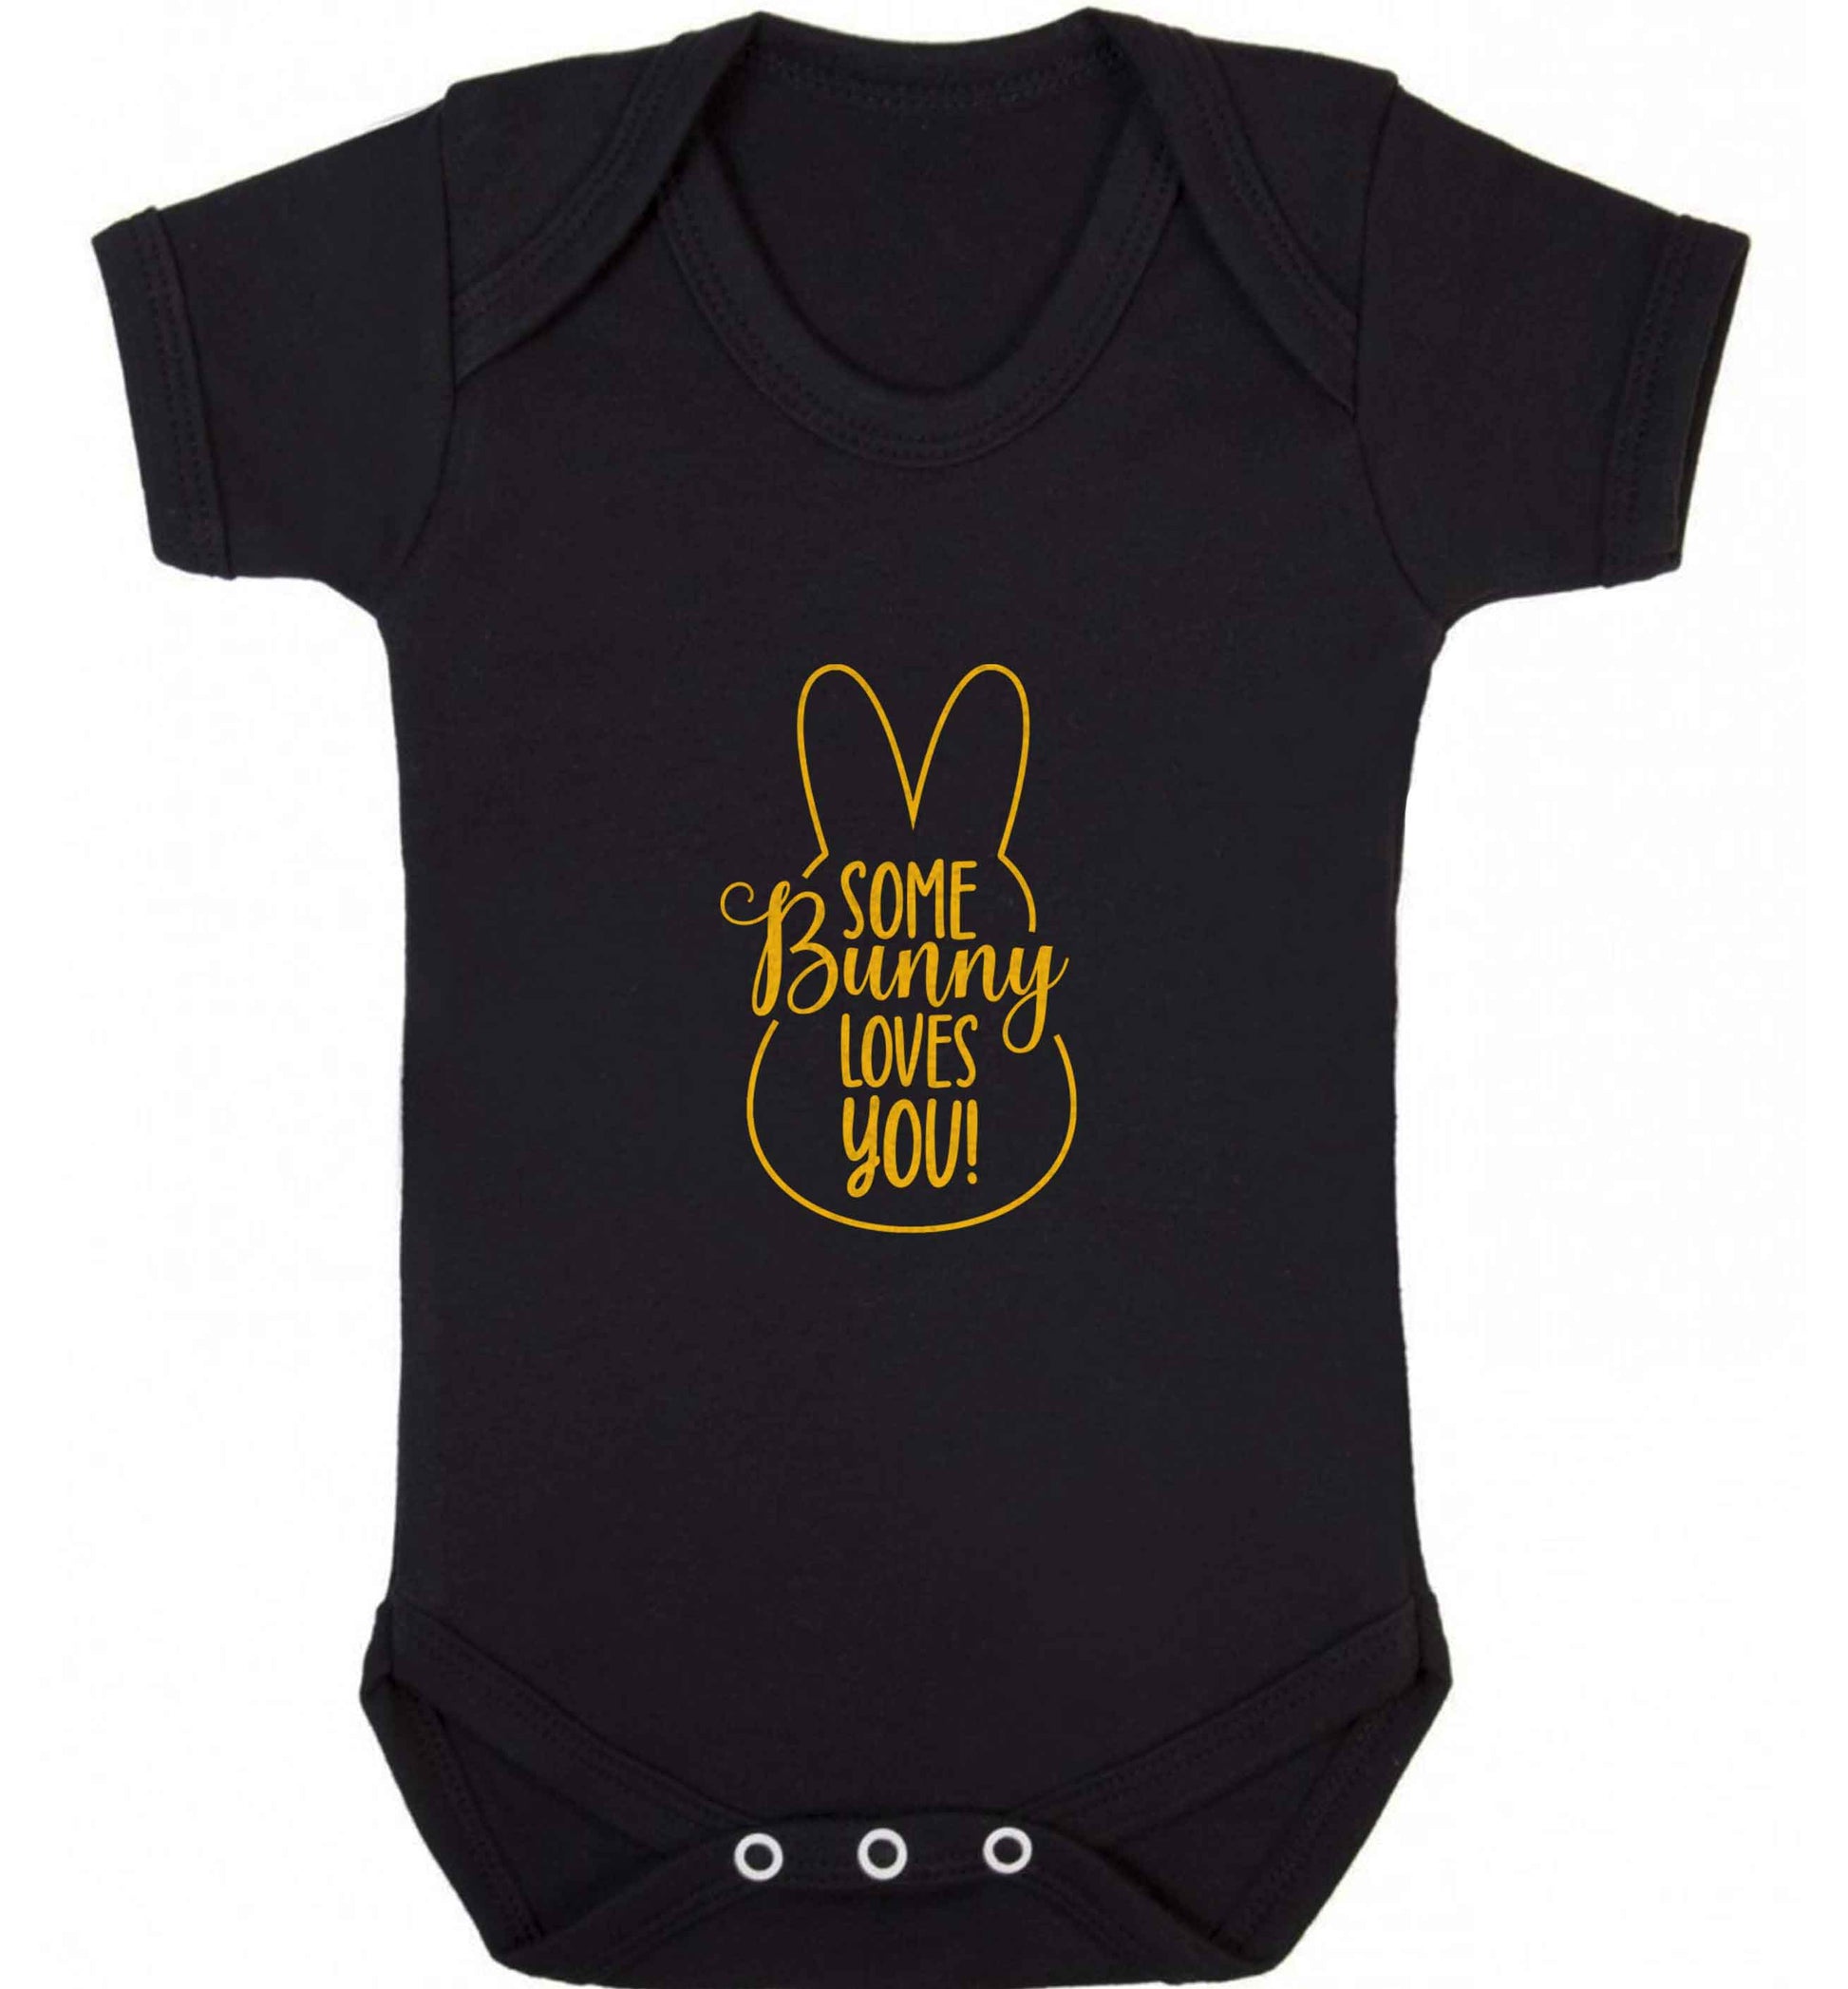 Some bunny loves you baby vest black 18-24 months